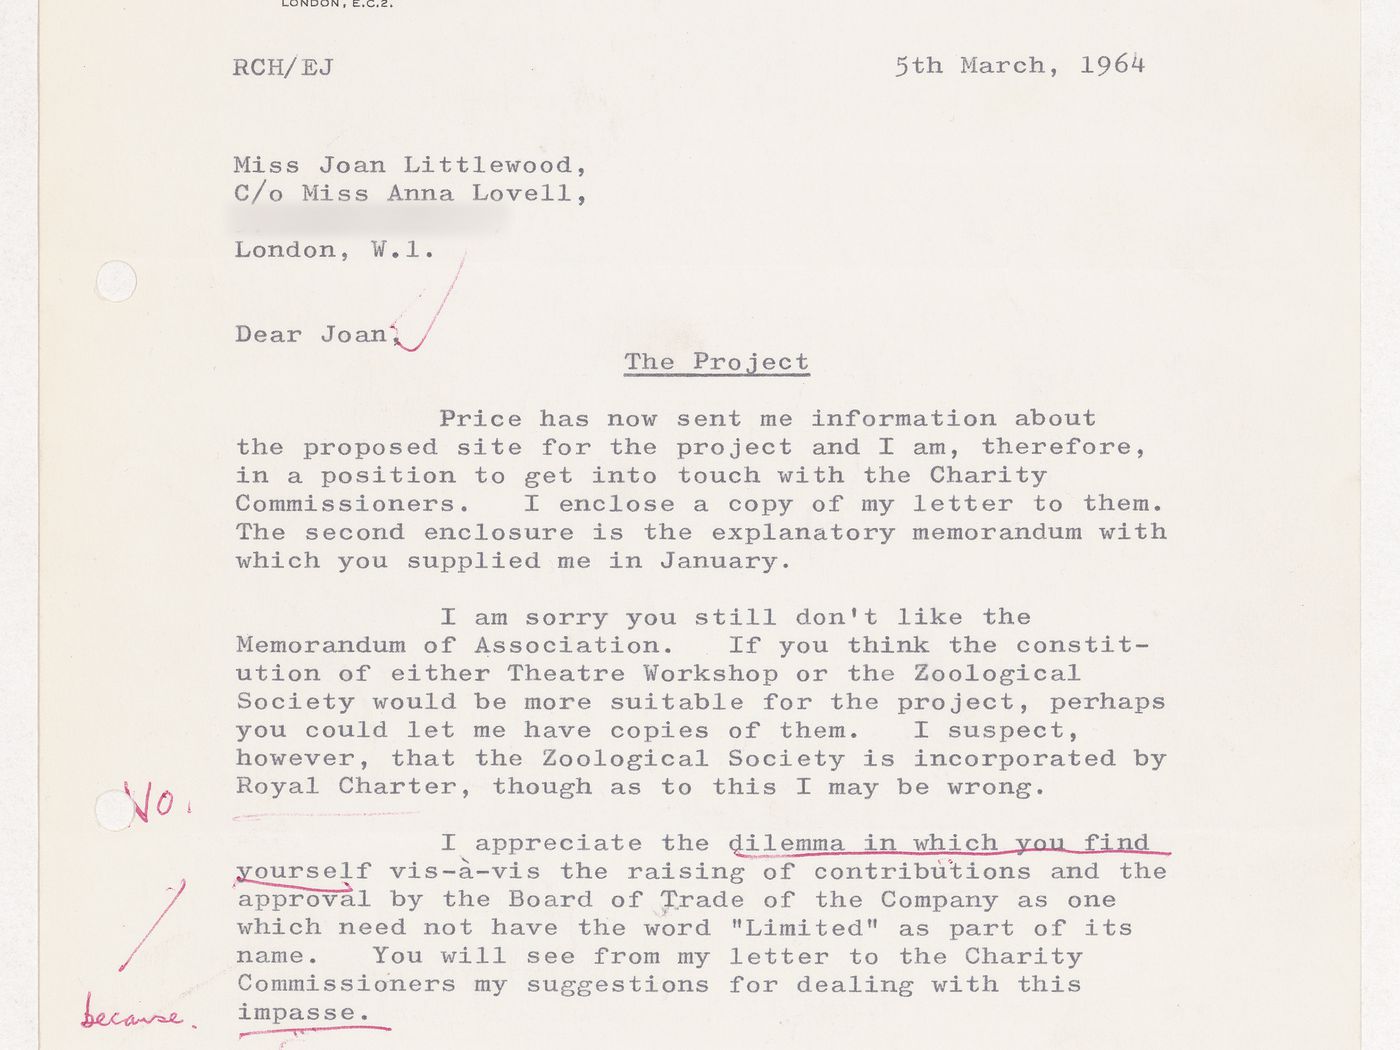 Letter from Brian Sandelson & Co. to Joan Littlewood in care of Miss Anna Lovell regarding the Fun Palace Project